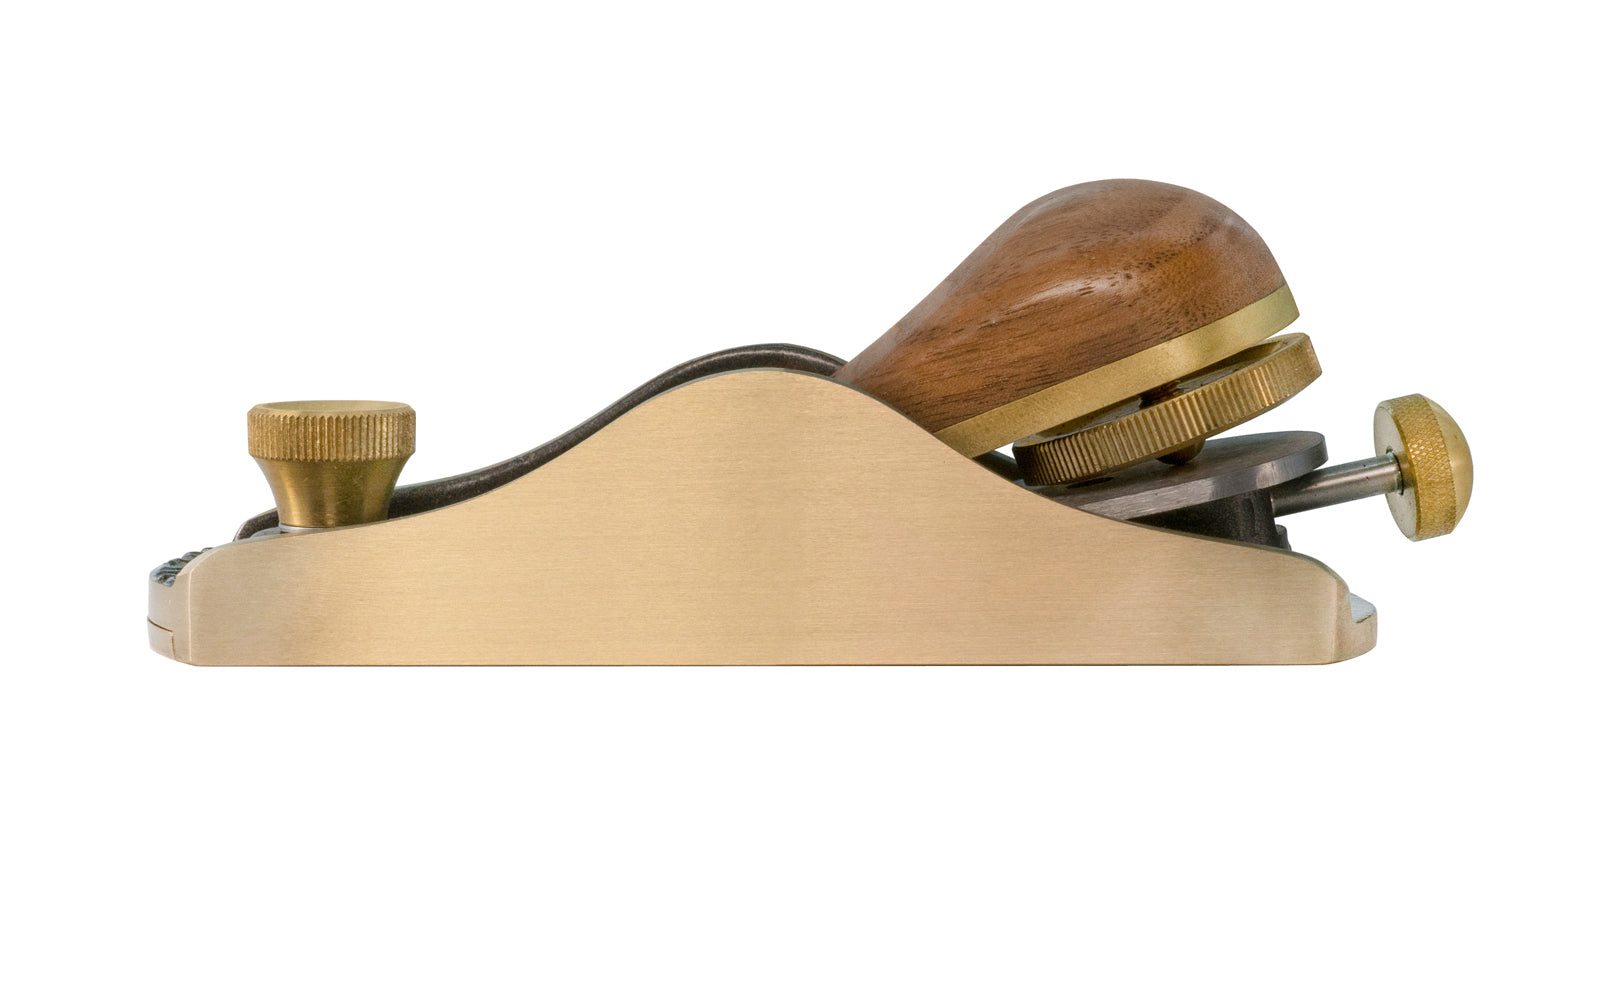 Clifton Low Angle Adjustable Mouth Block Plane. 1-5/8" (41 mm) wide cutter blade. Designed to fit your hand perfectly with it’s quality Walnut handle, this block plane will allow you to shave the surface of your project with ease. Made from a high quality bronze casting. Clifton model CBPA. Made in Sheffield, England.